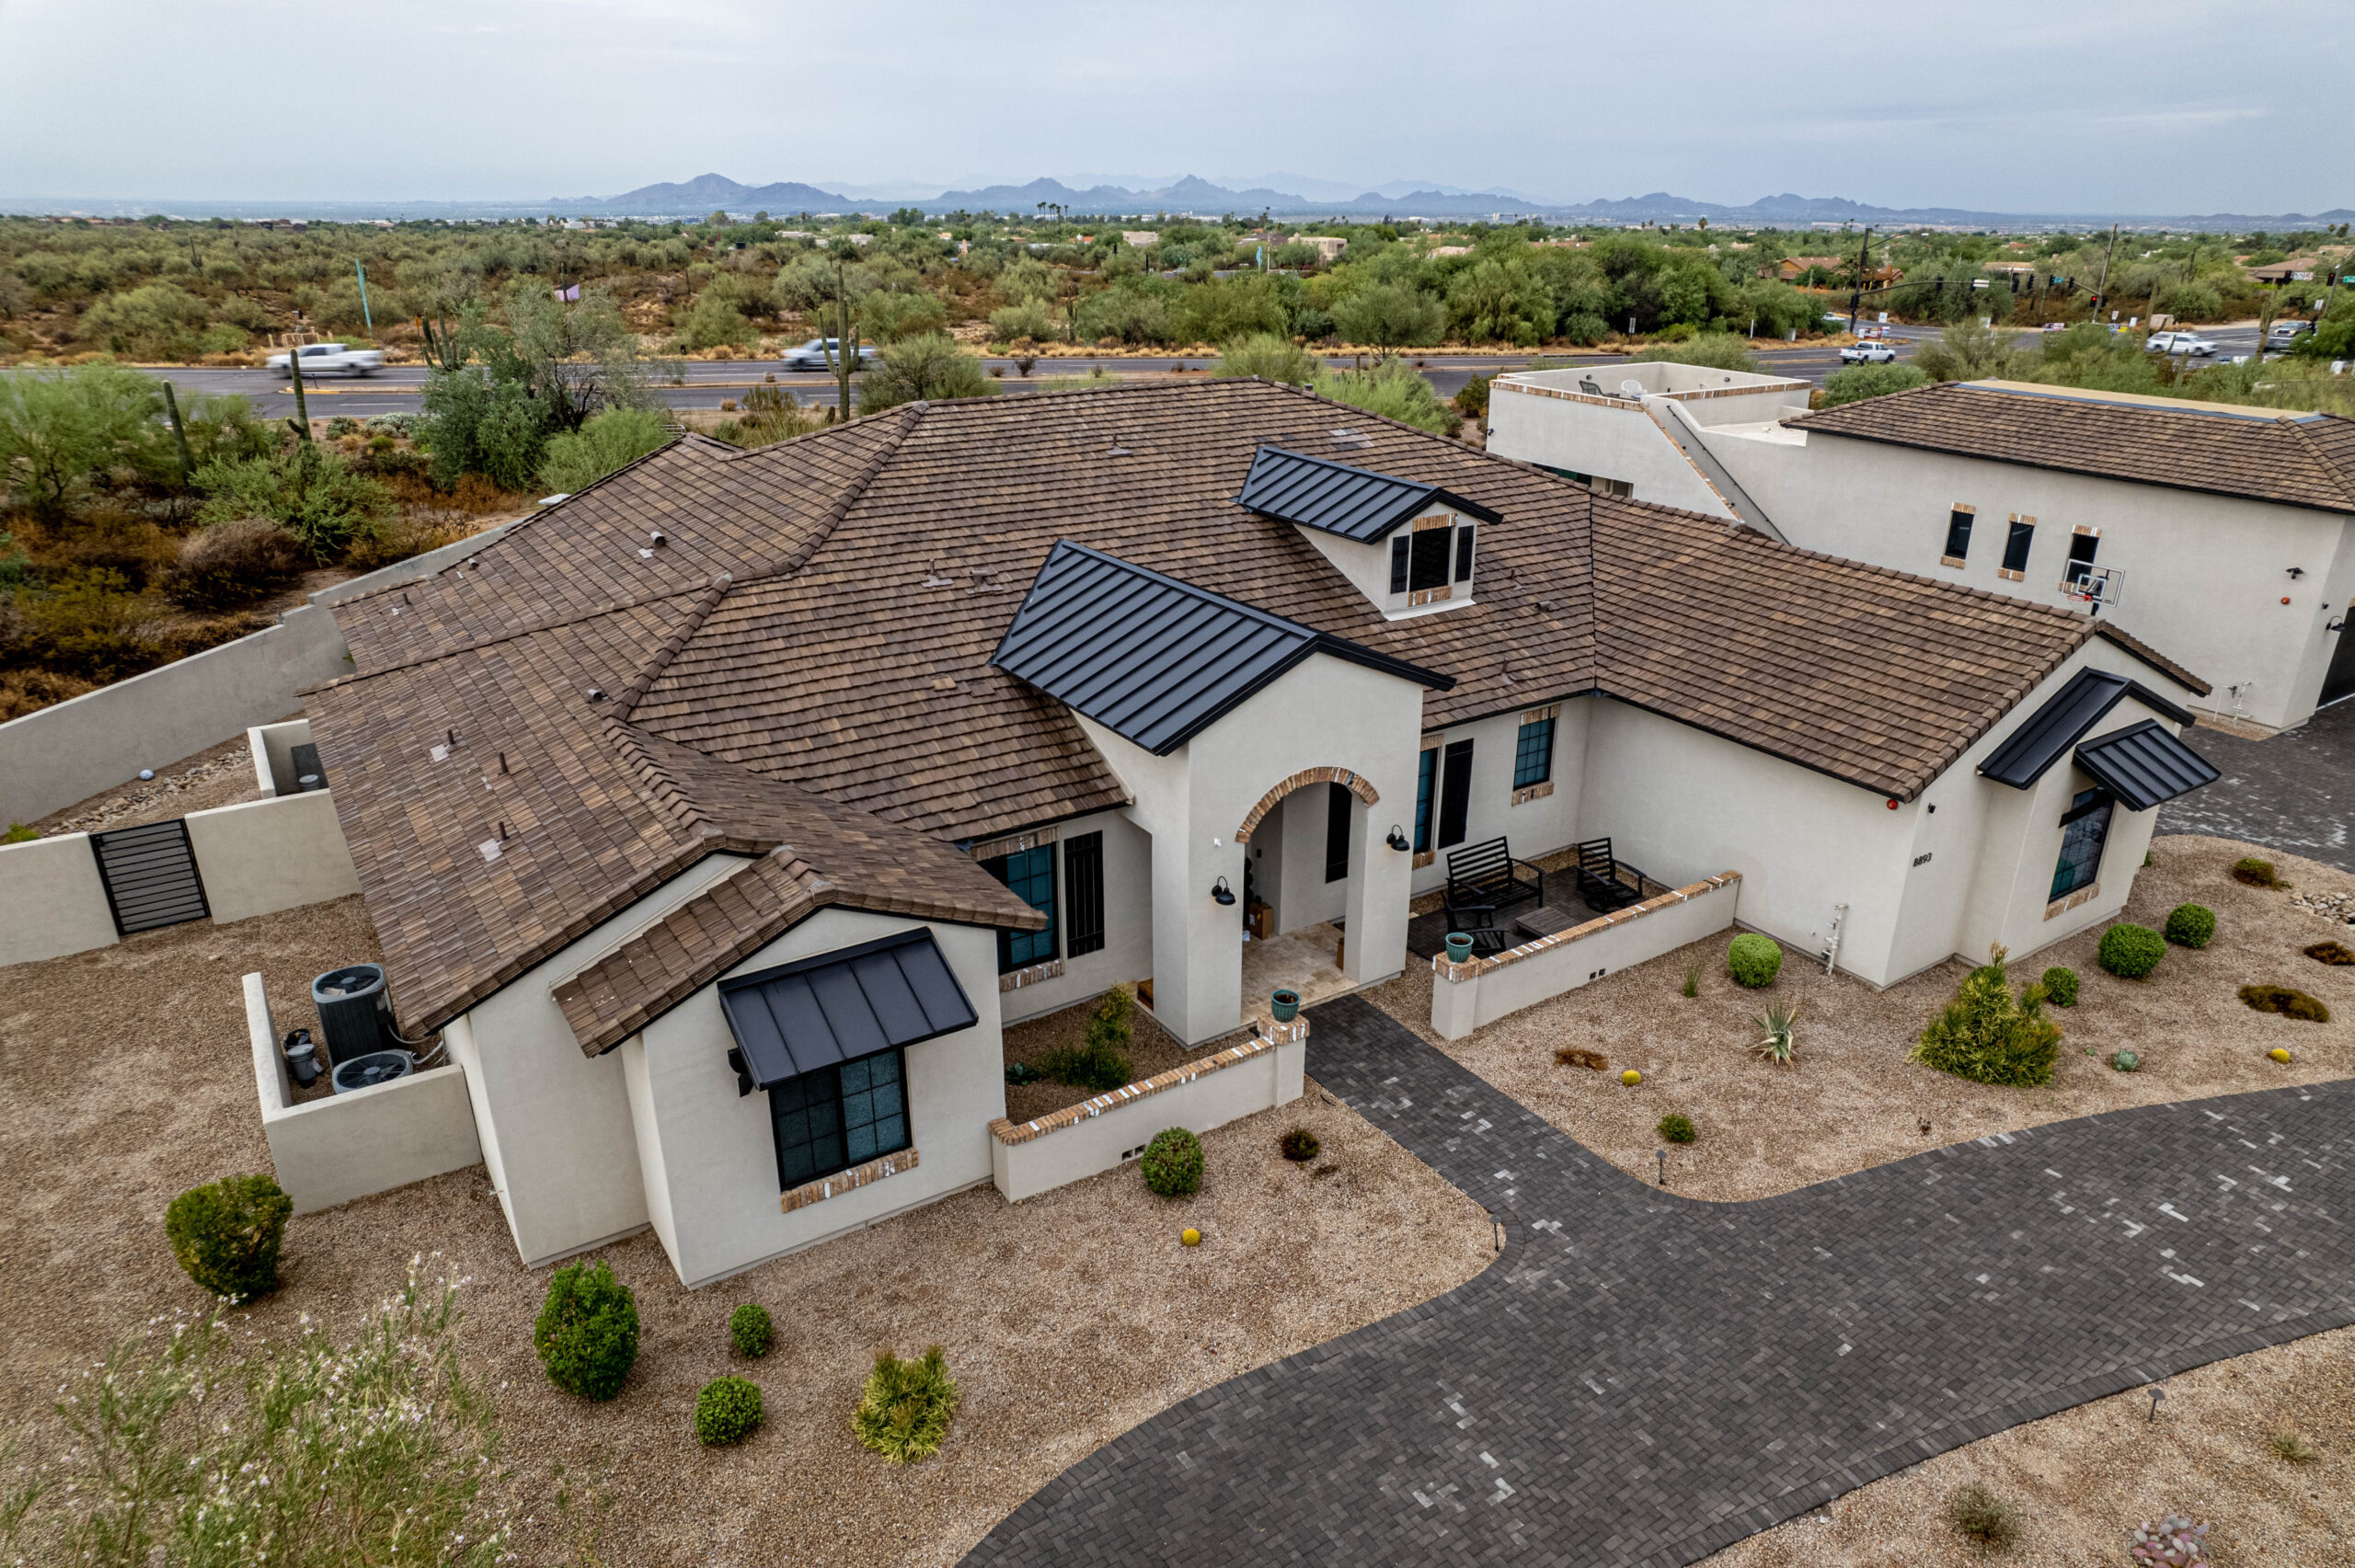 Top-down view of a recently completed tile roofing project in Whisper Rock.